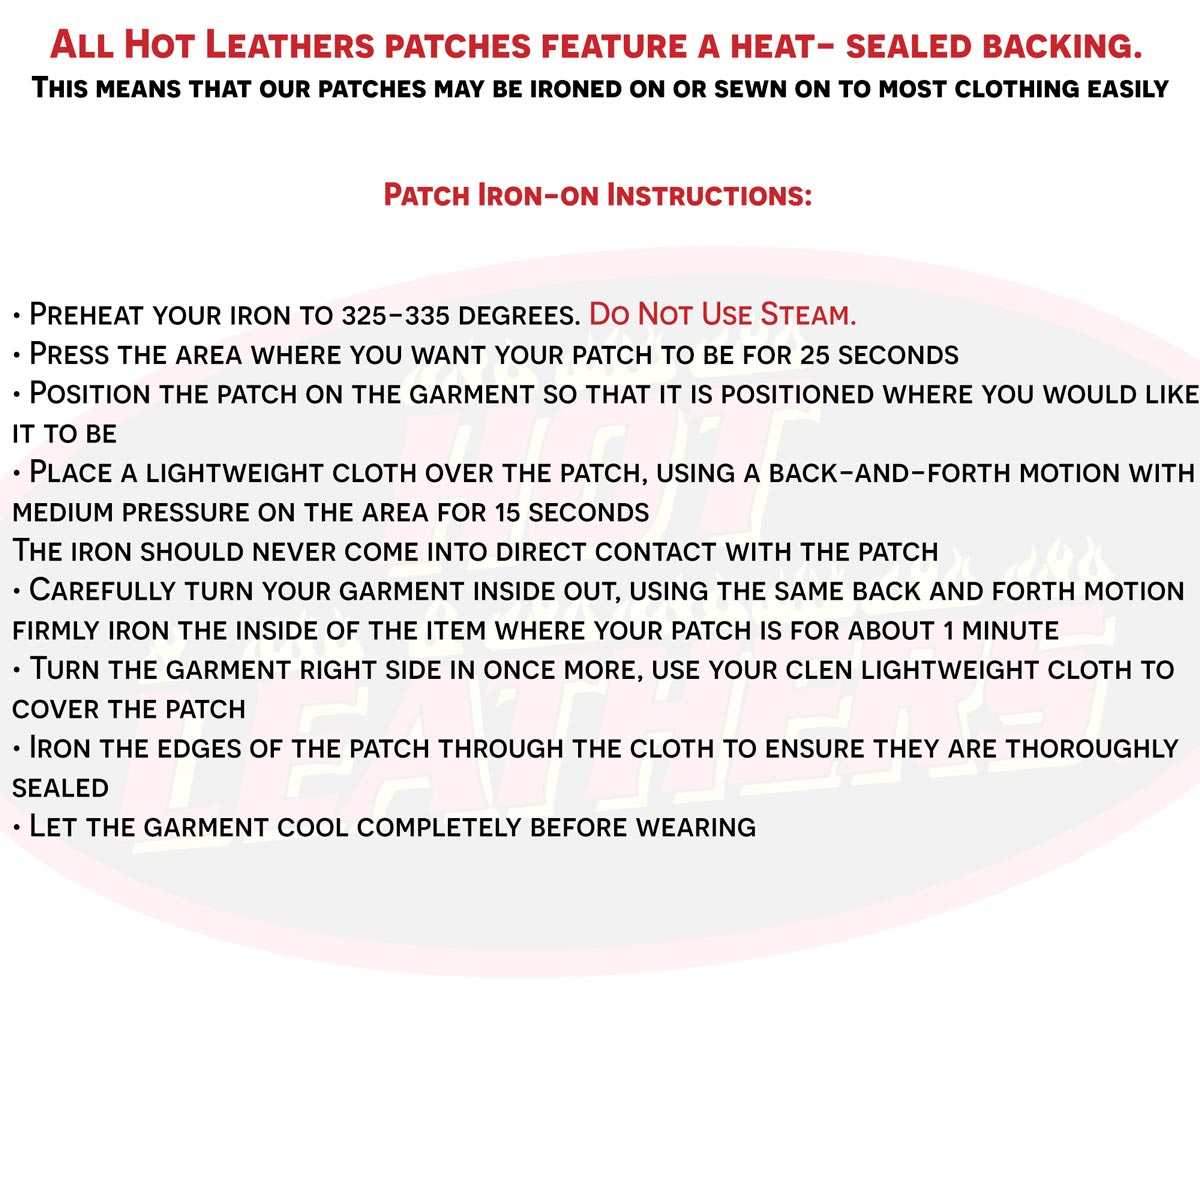 Hot Leathers School Is Important 3" X 3" Patch PPL9999